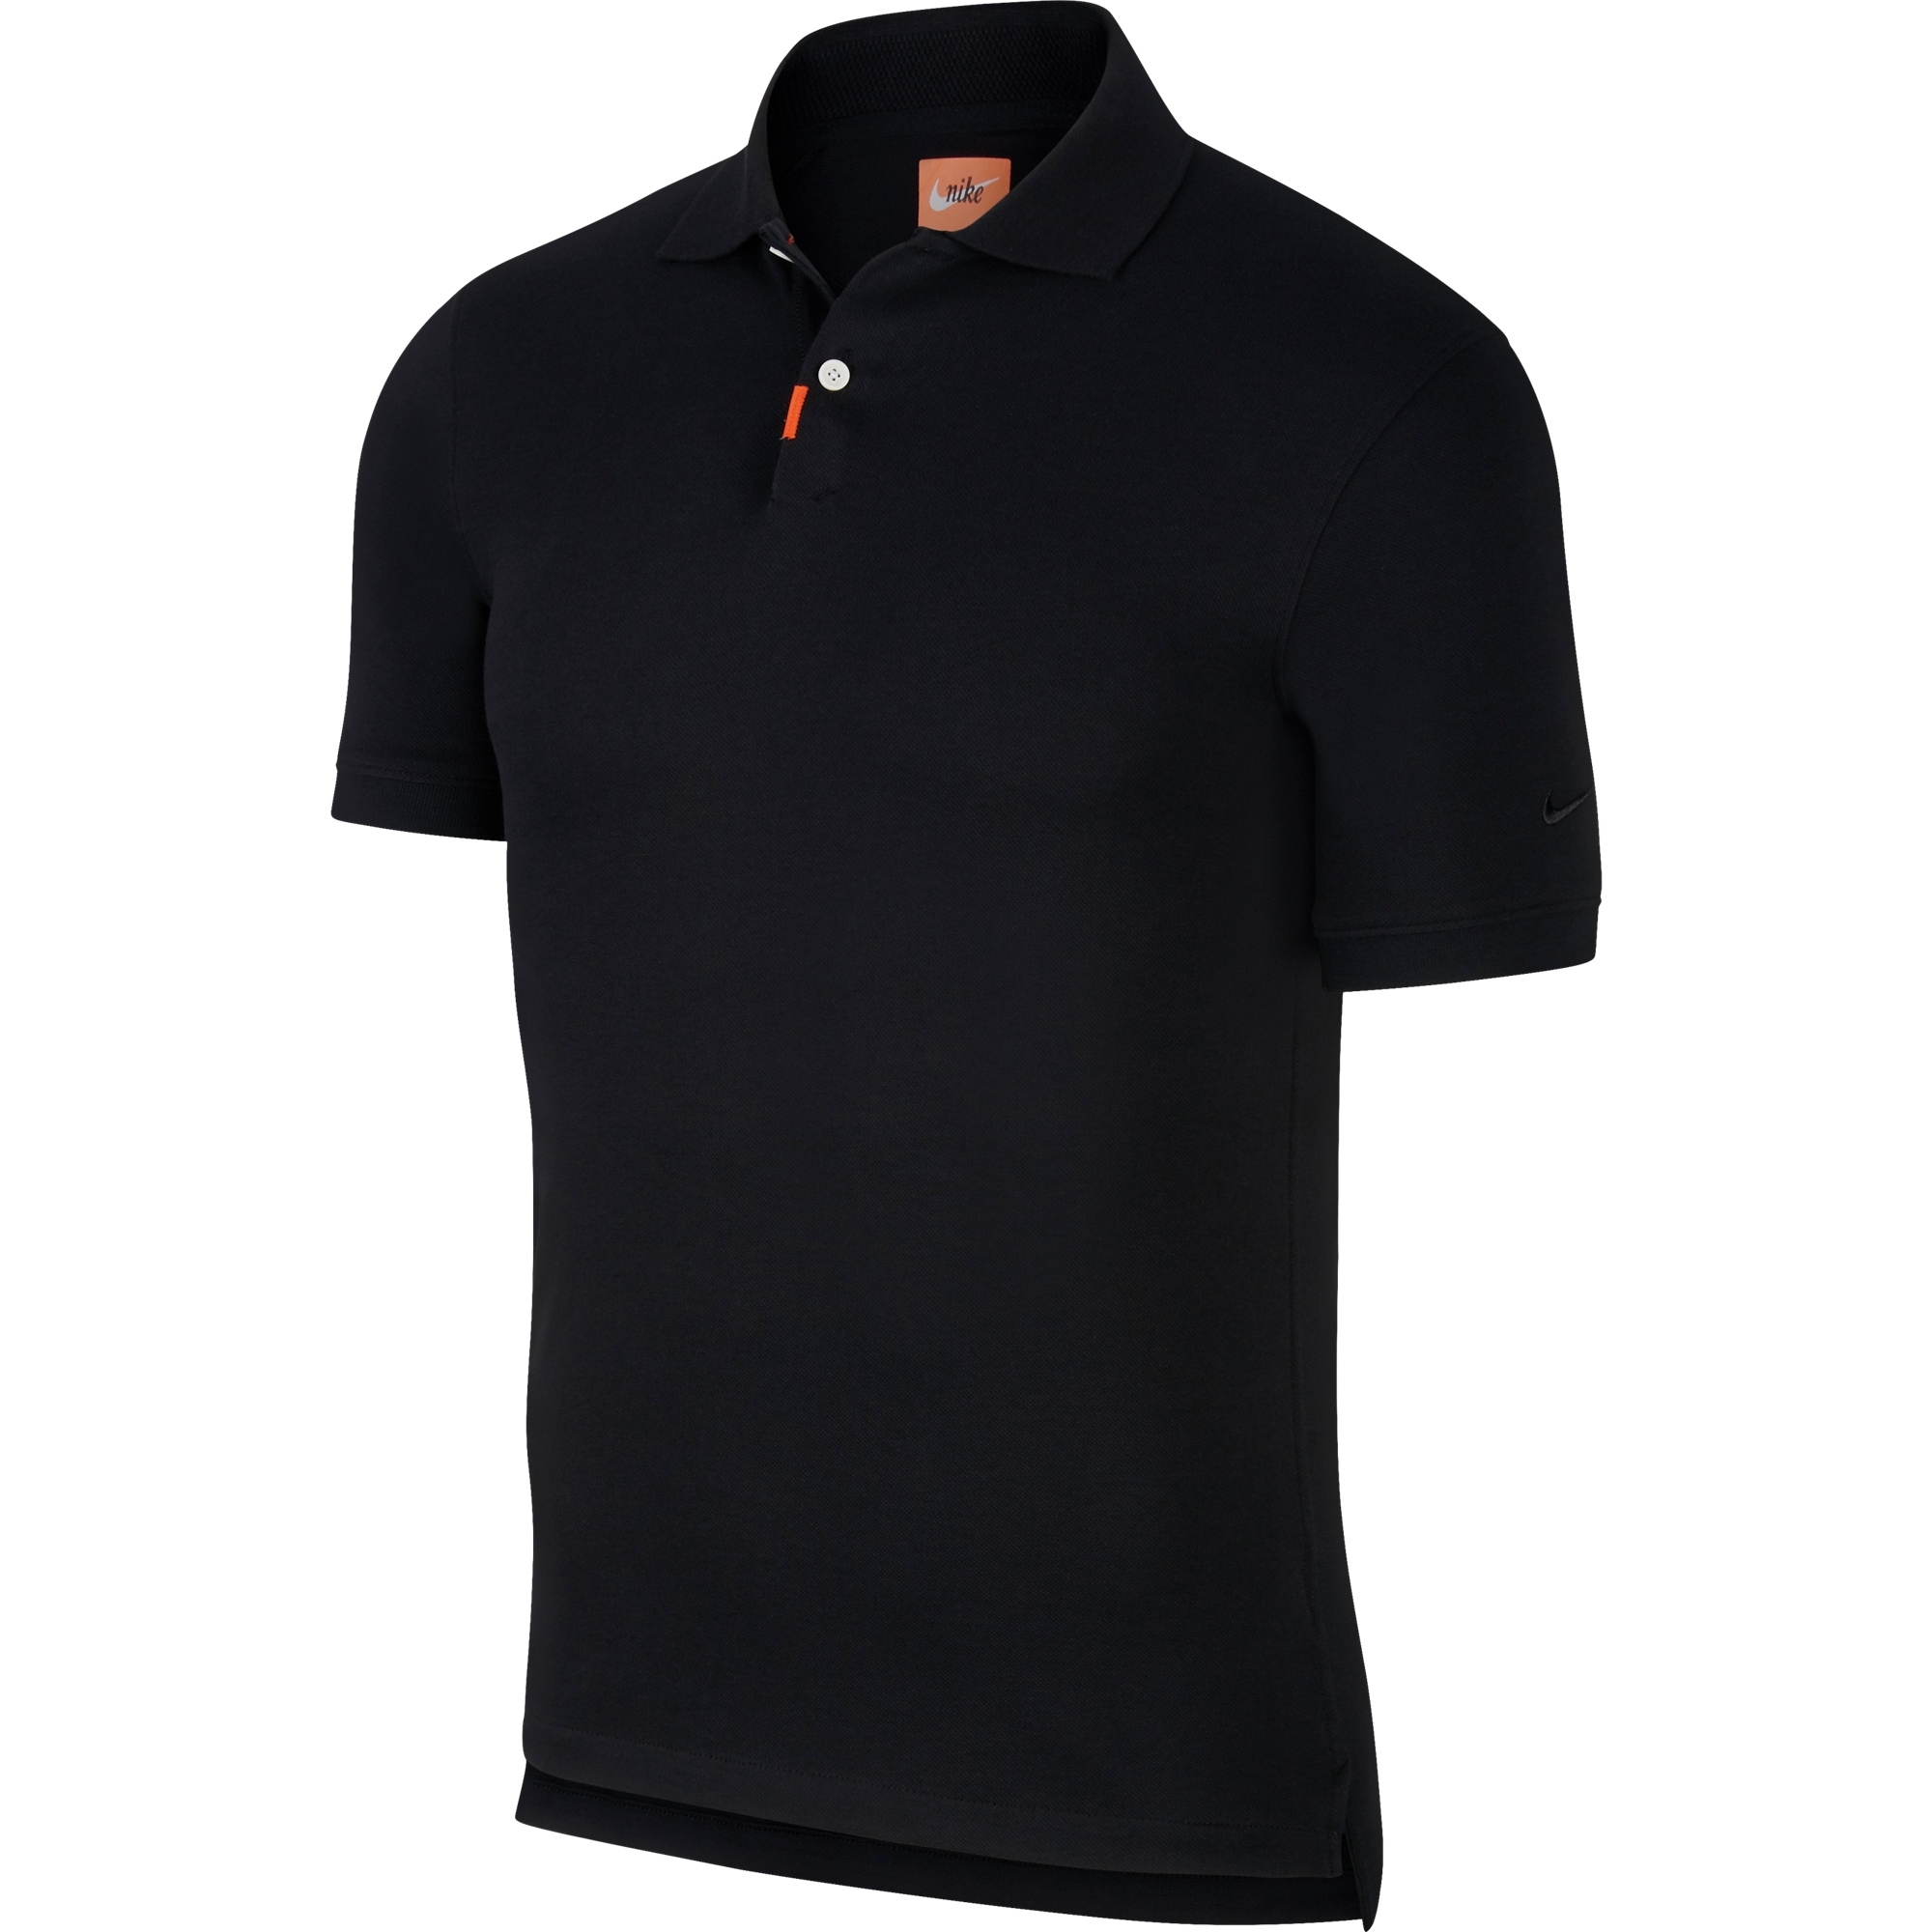 Nike Mens Dri Fit Slim Fit Breathable Golf Polo Shirt S- Chest 35-37.5